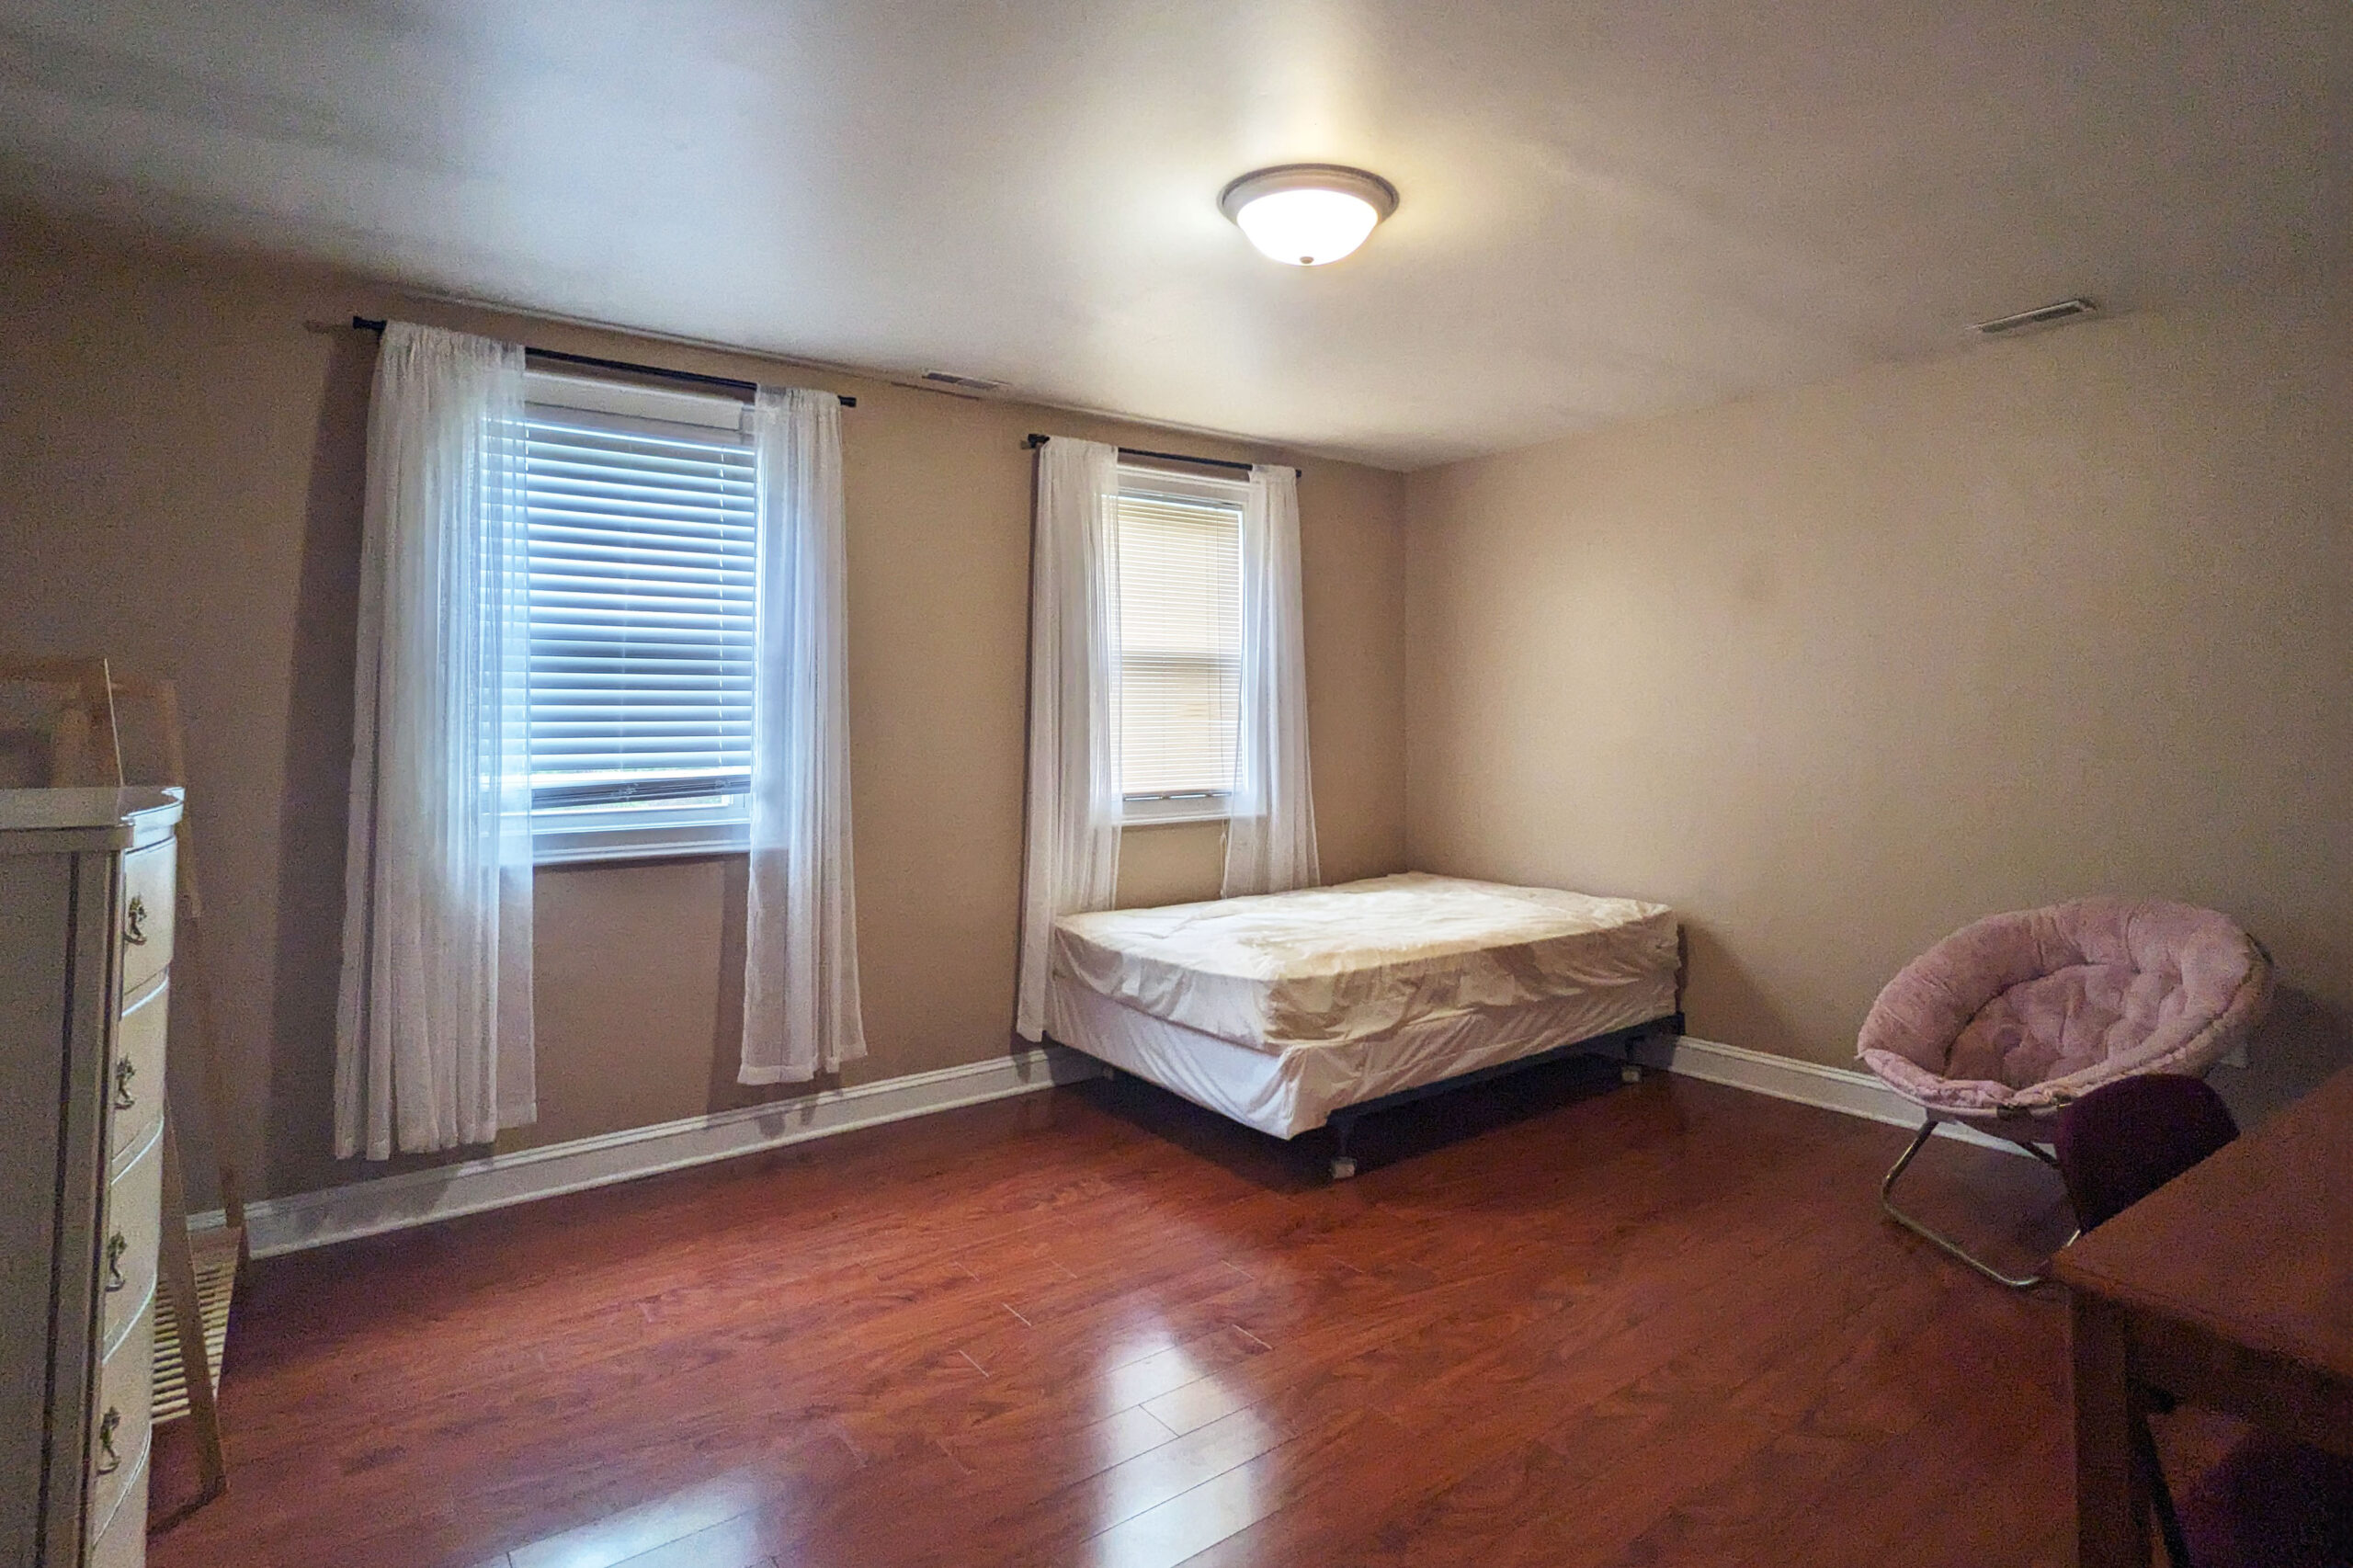 Bedroom at 58 Fairground Ave. 